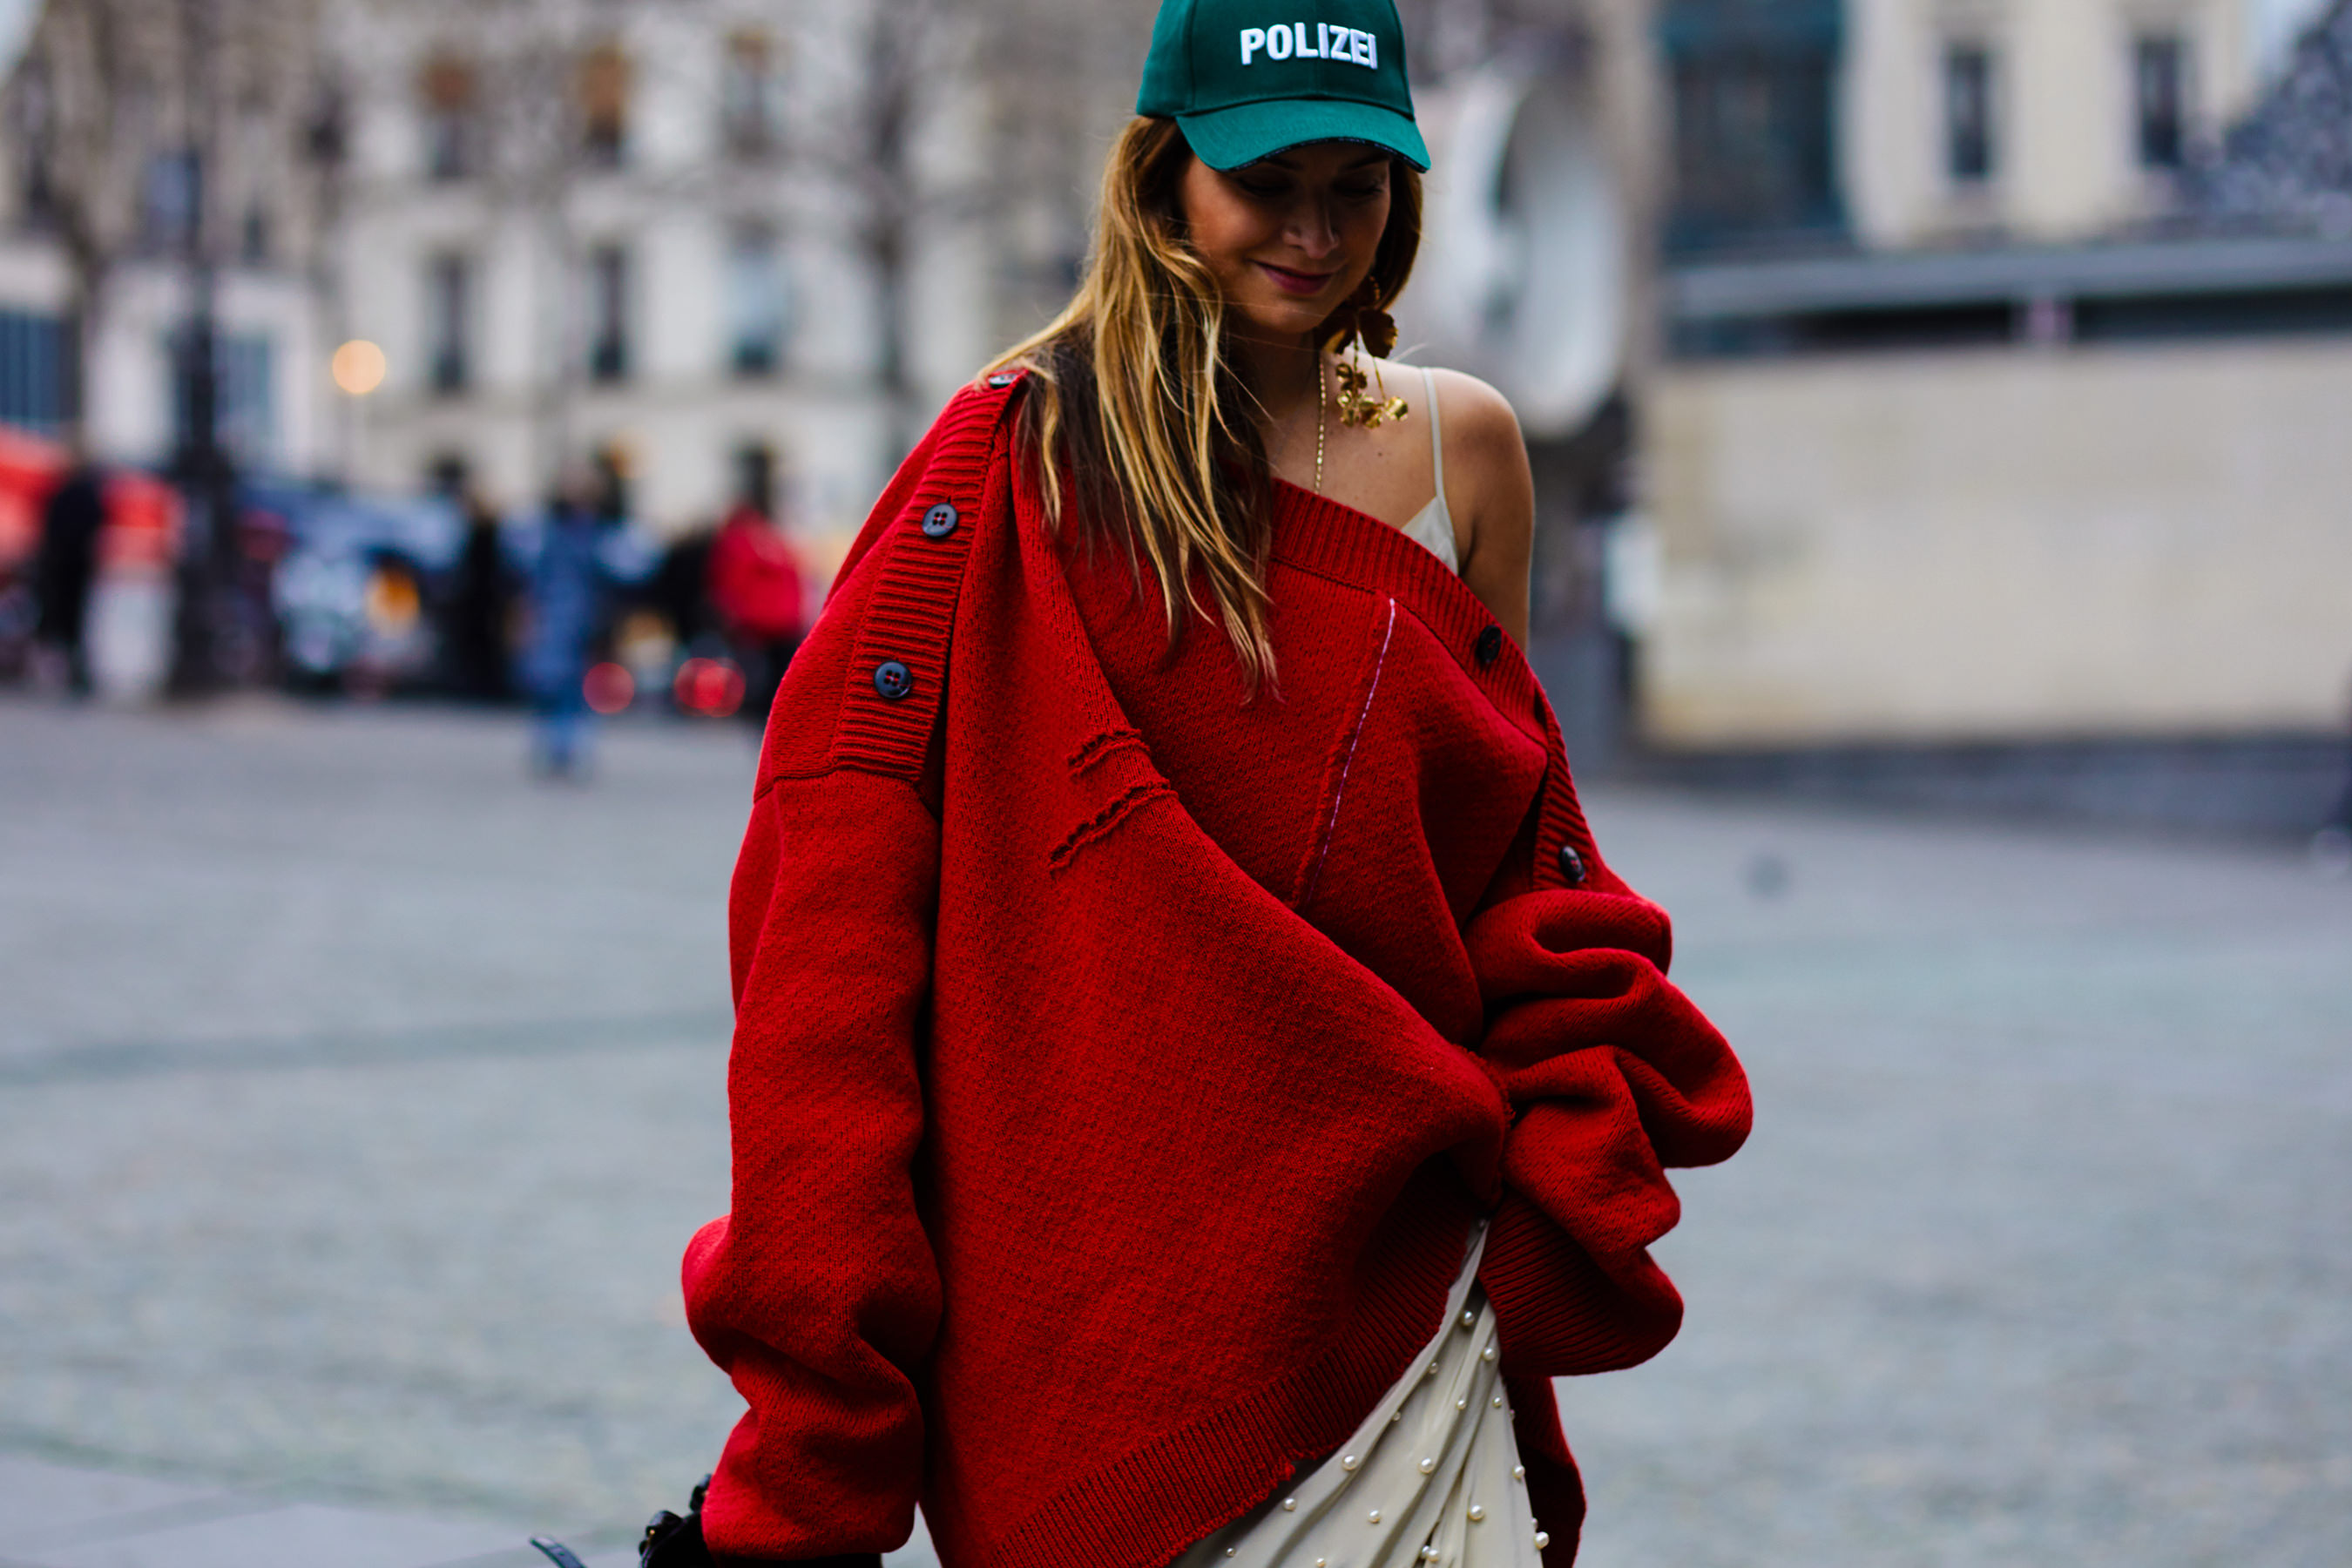 Paris Haute Couture S/S 2017 Street Style: Luisa Fernanda Espinosa wearing a Raf Simons sweater and Vetements hat before the Vetements FW 17/18 Fashion Show